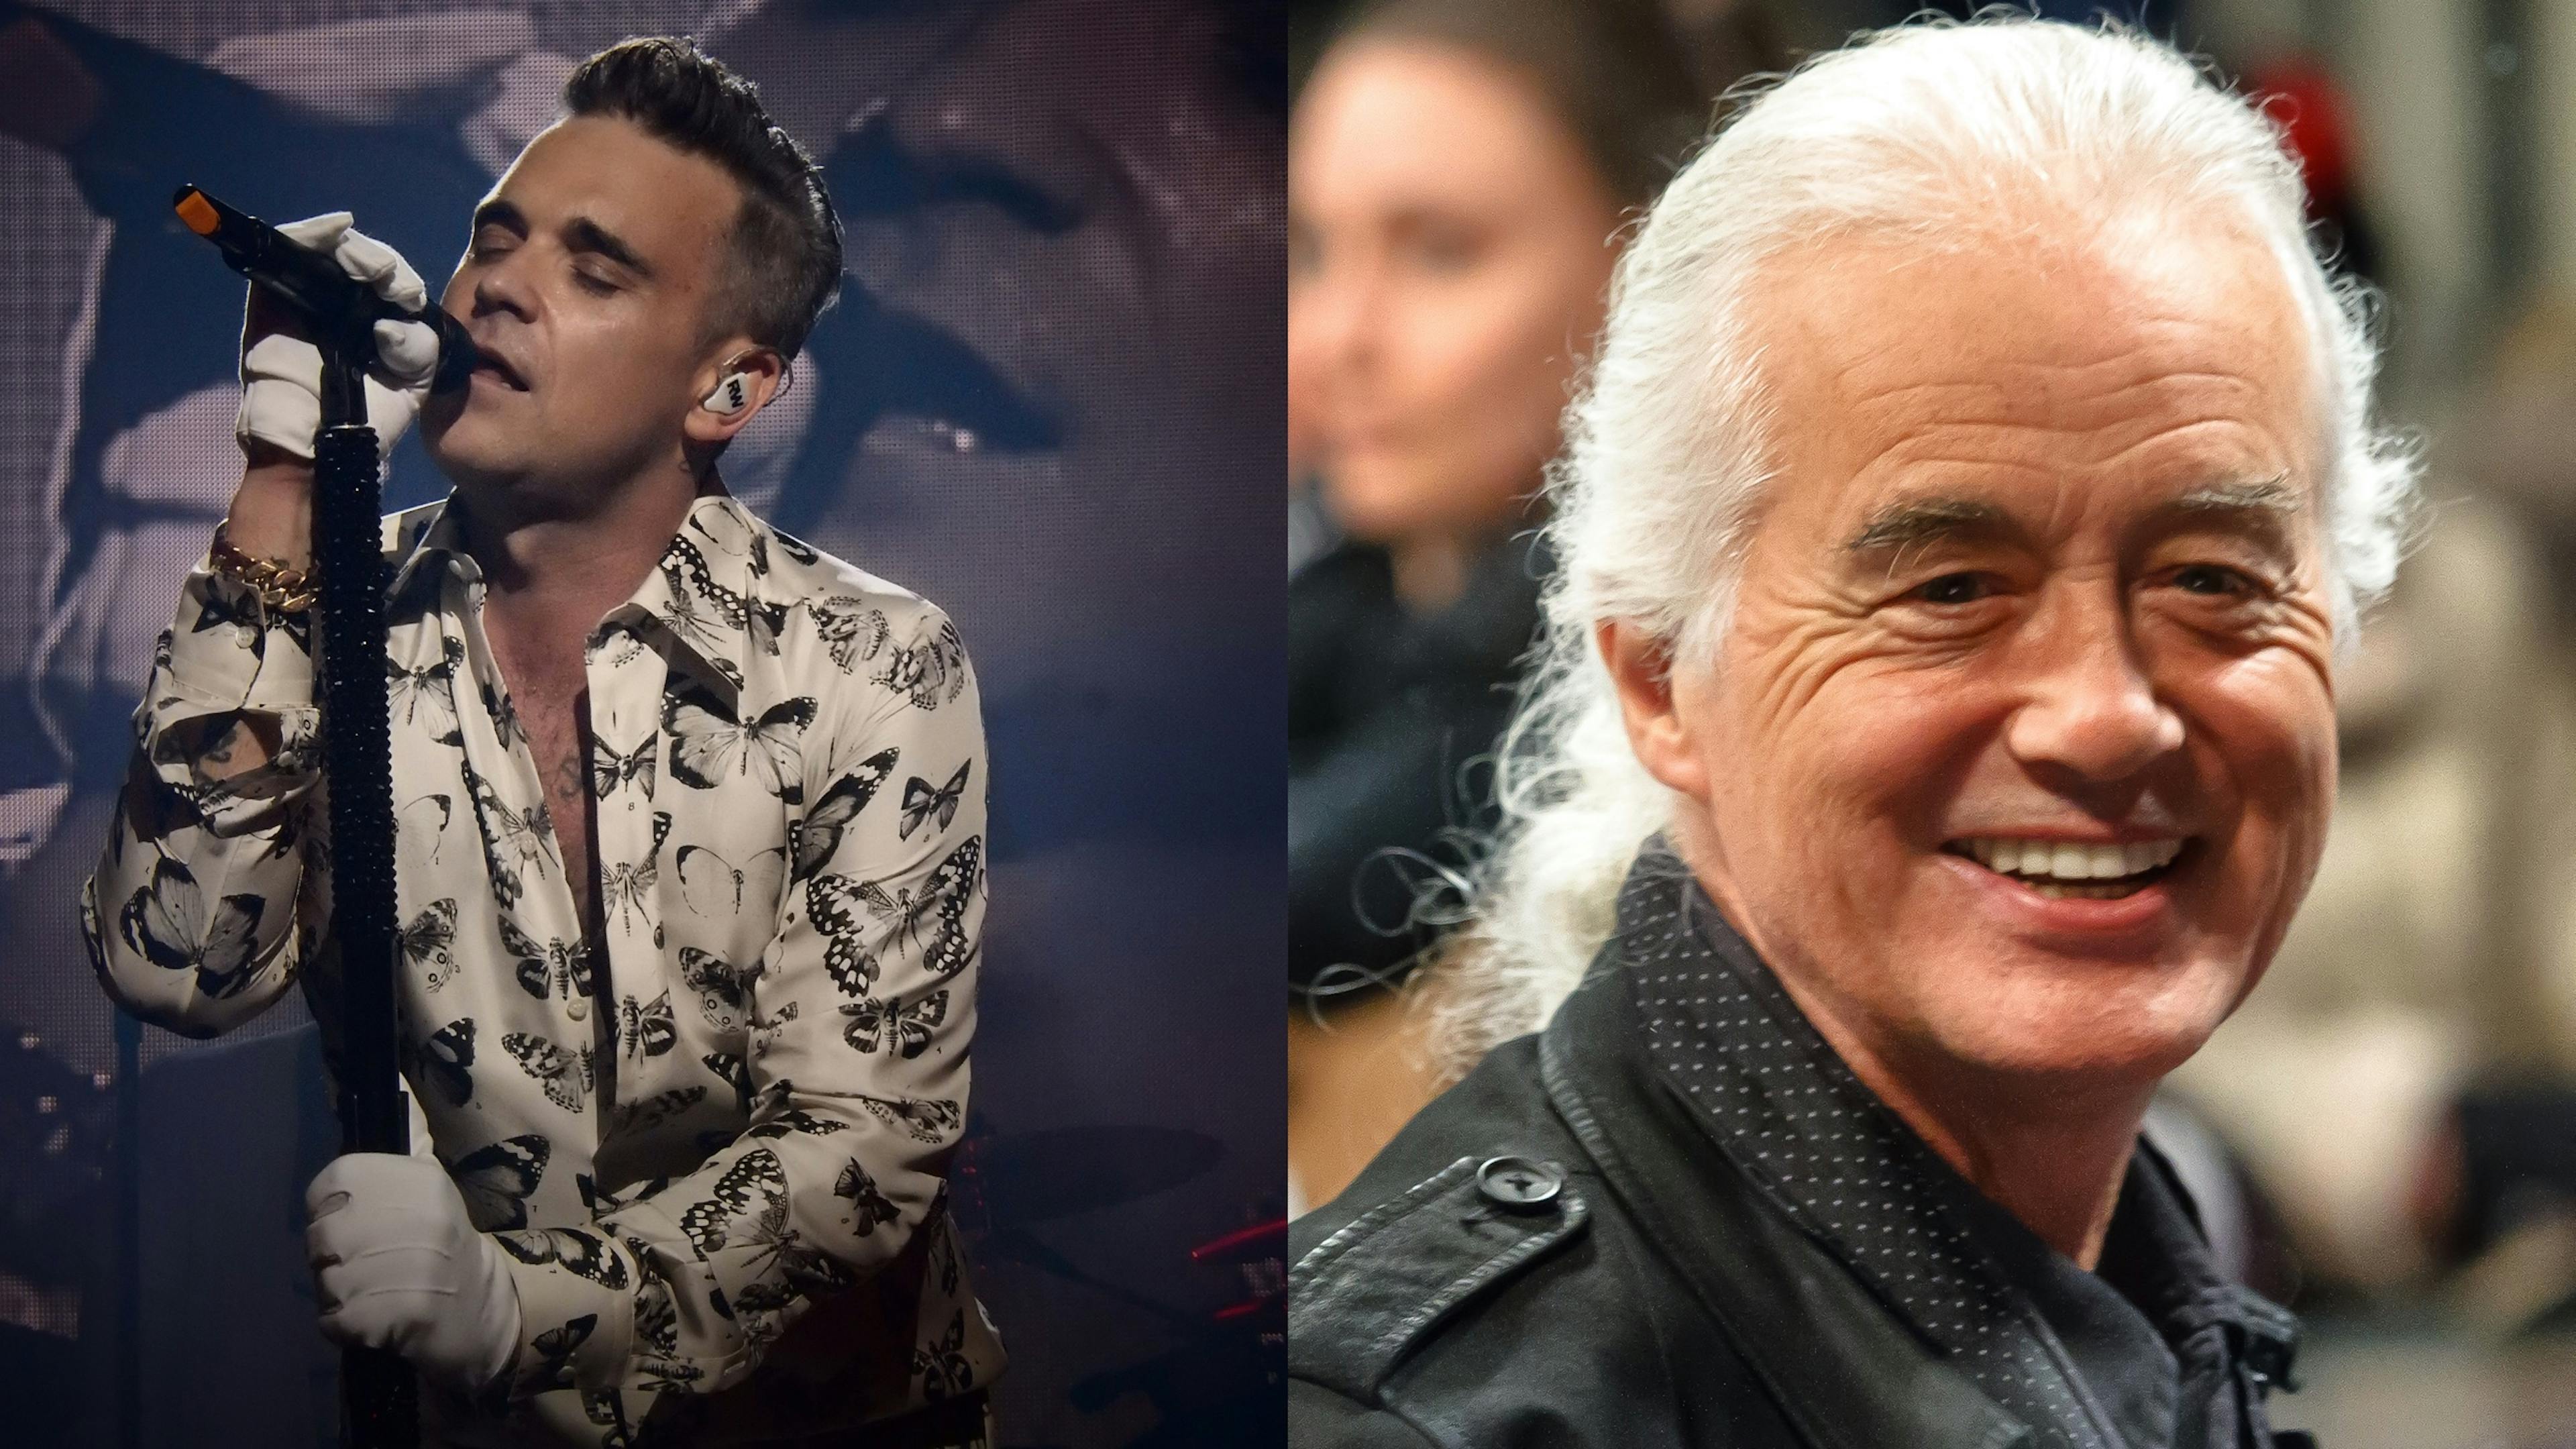 Robbie Williams Uses Black Sabbath To Torment His Neighbour, Jimmy Page